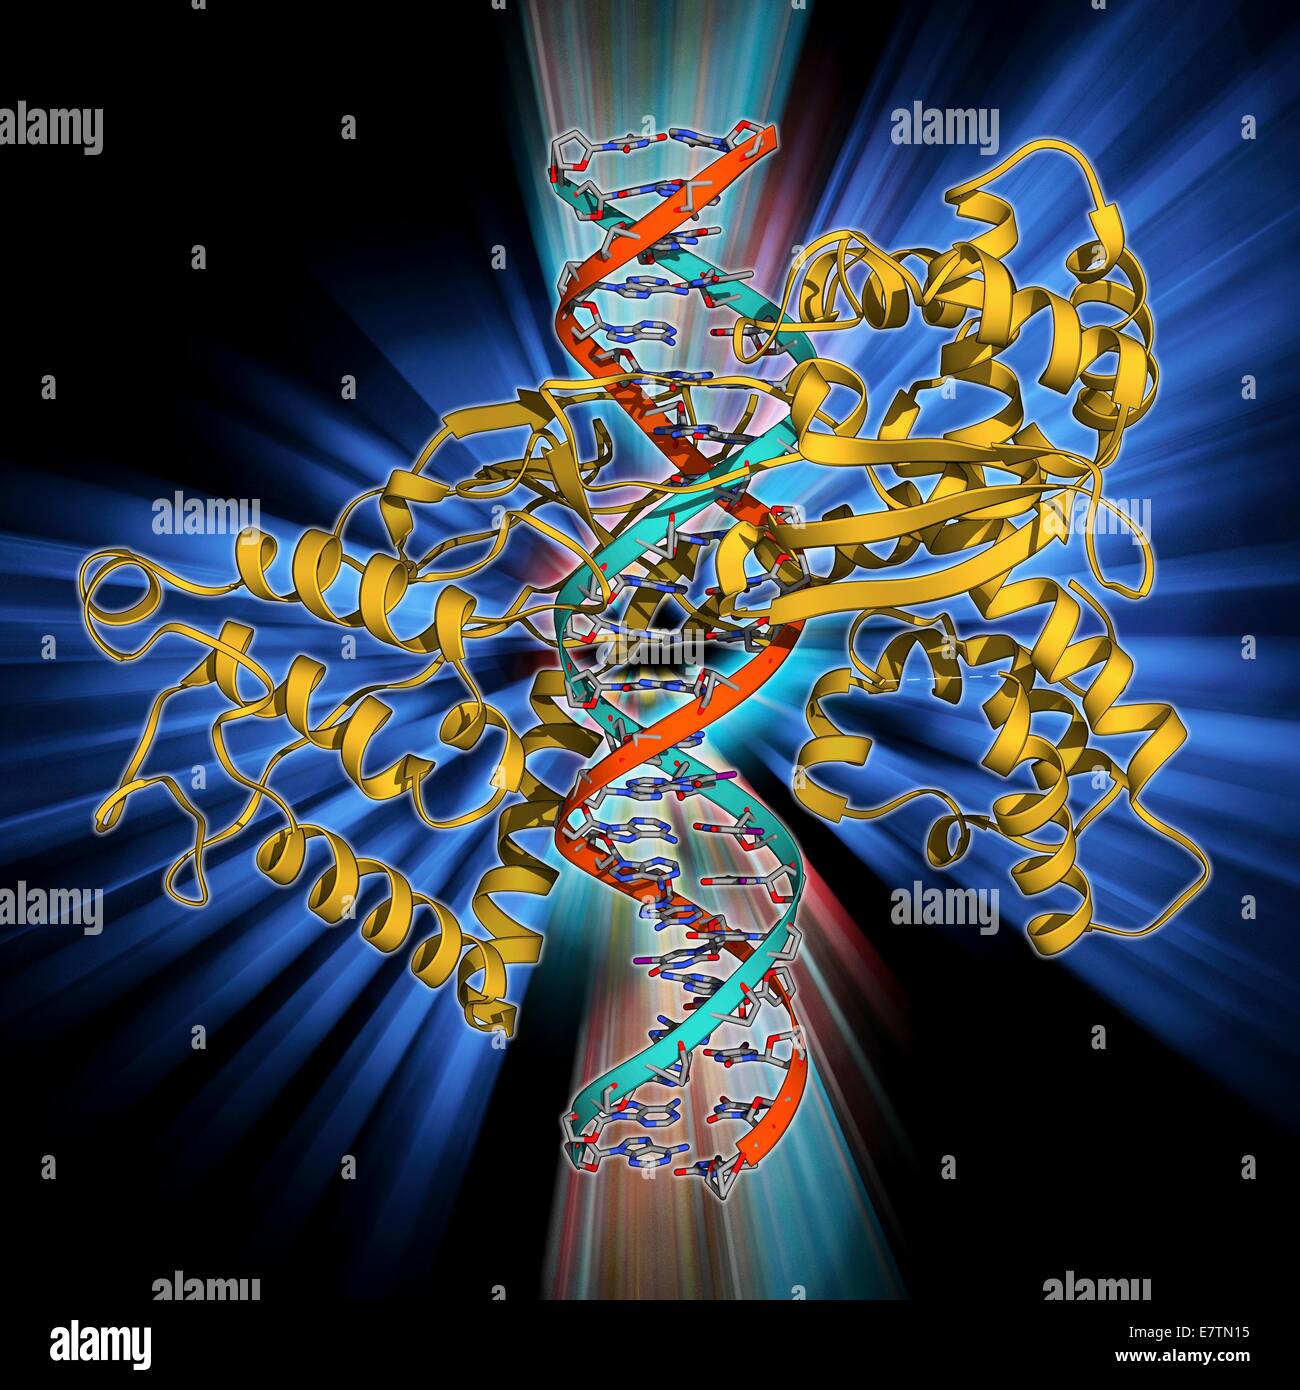 Type I topoisomerase bound to DNA. Molecular model showing a type I topoisomerase molecule (khaki) bound to a strand of DNA (deoxyribonucleic acid, red and blue). The topoisomerase enzymes assist in uncoiling DNA. DNA is usually stored in a supercoiled fo Stock Photo